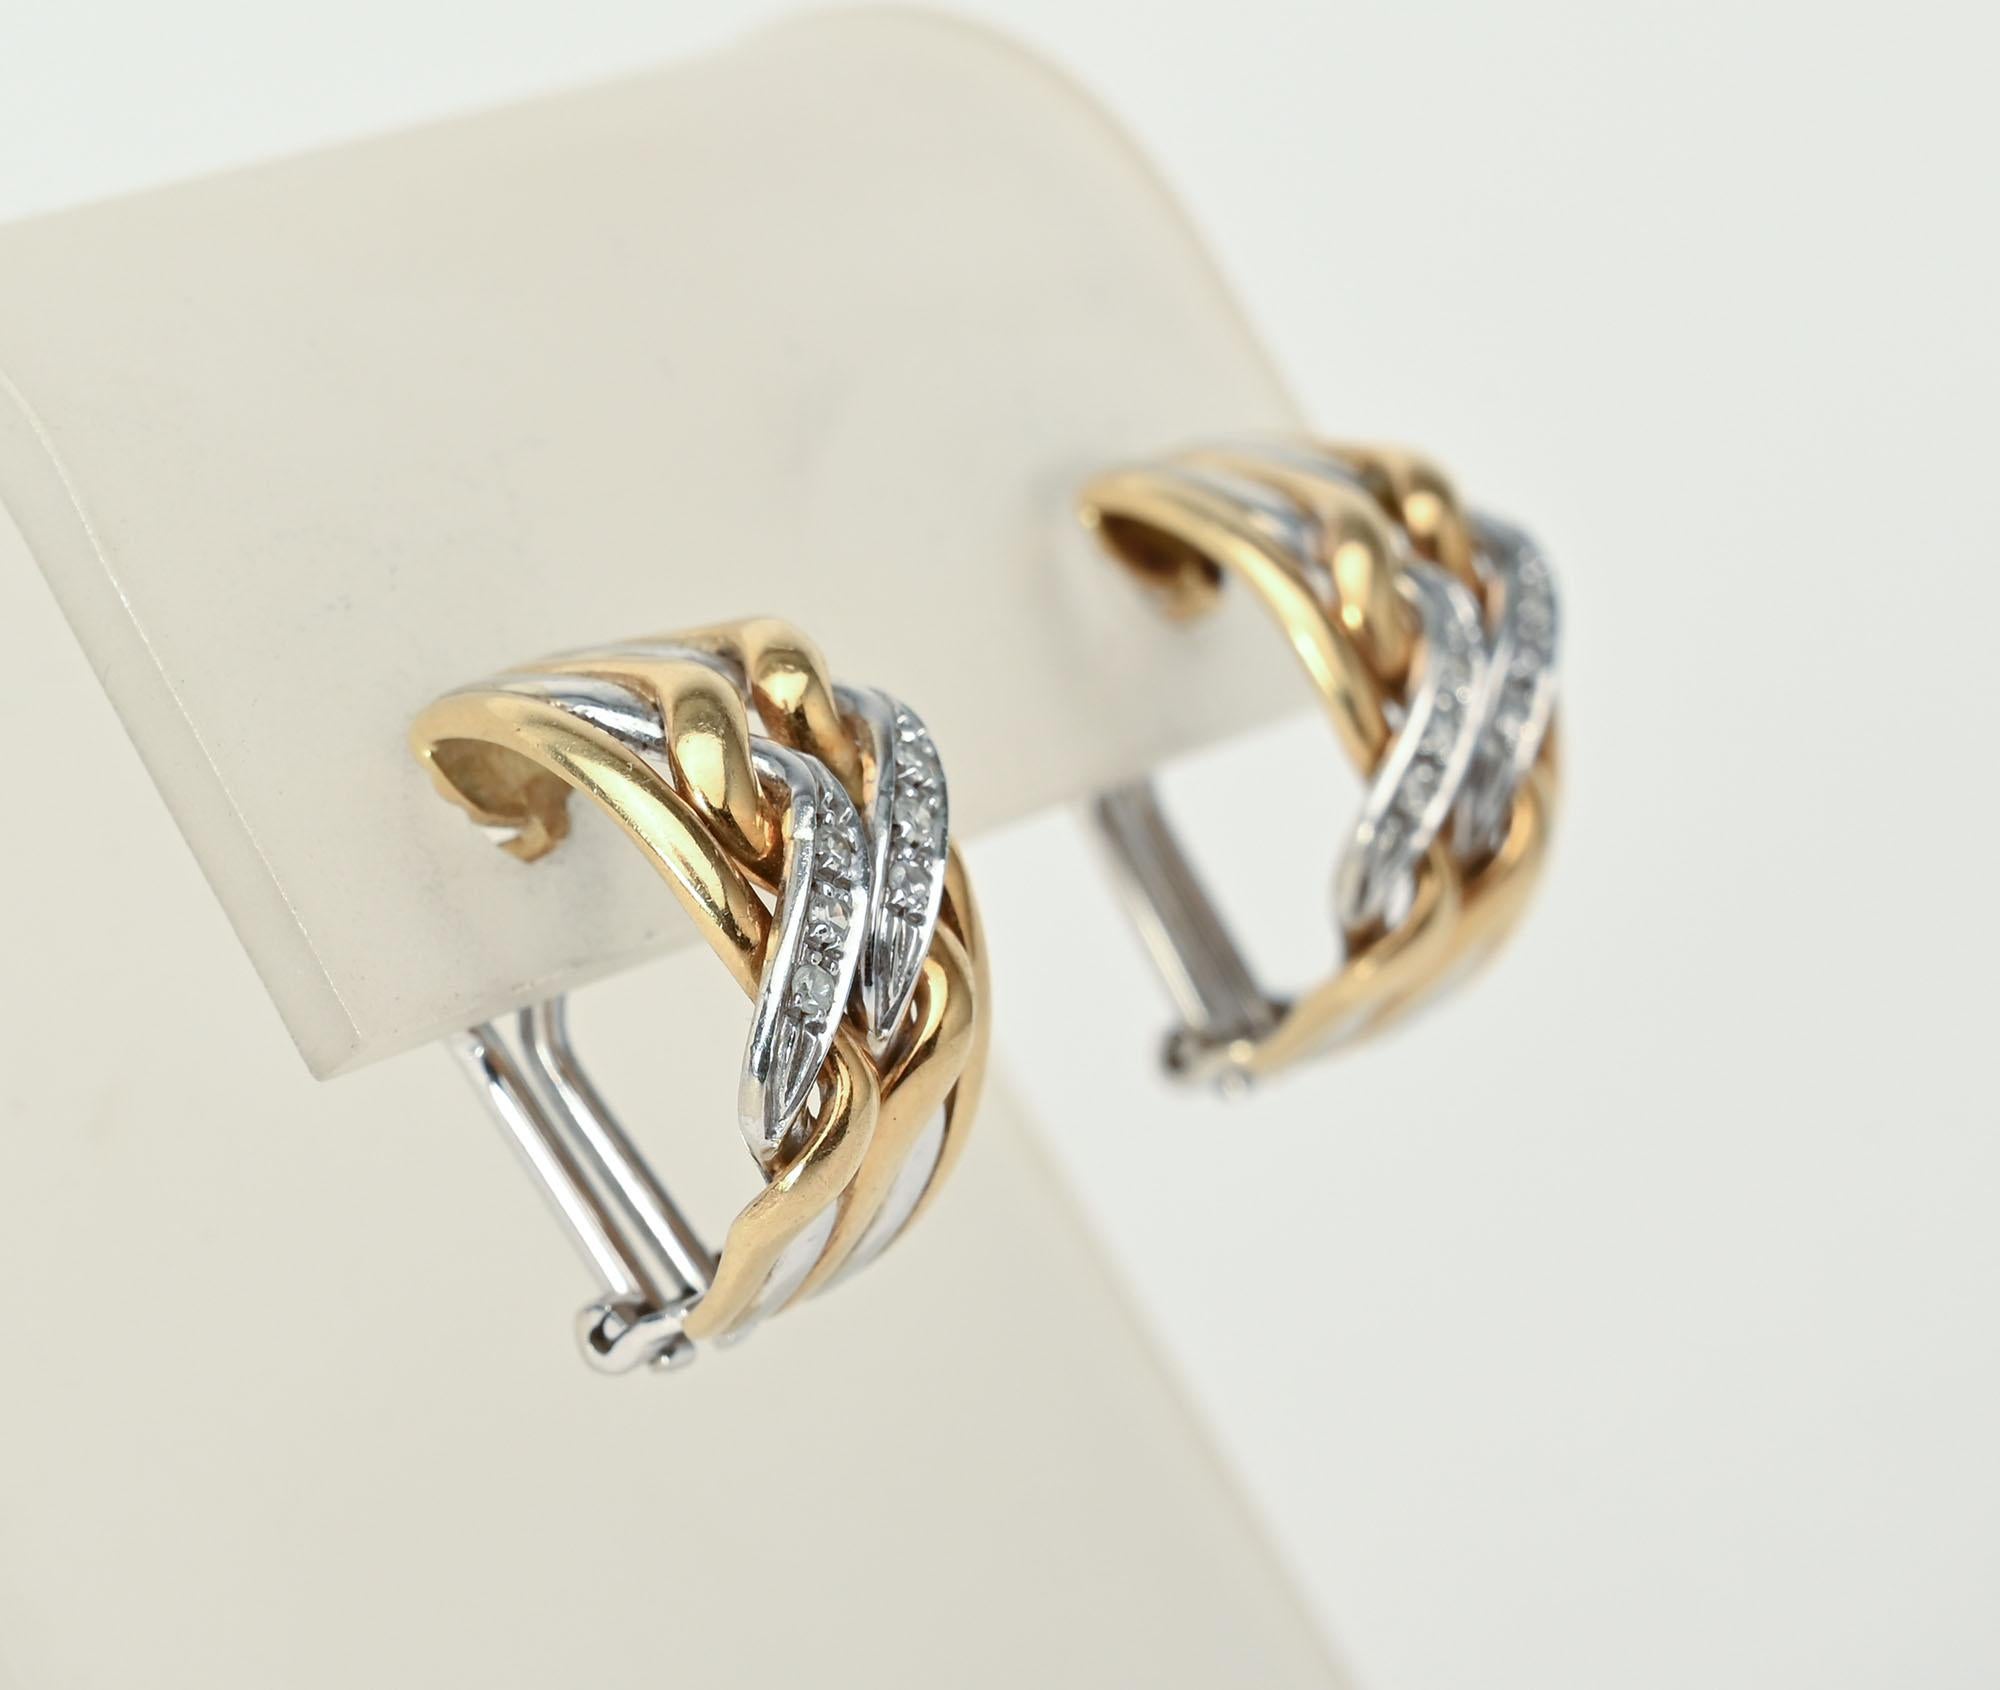 Wonderfully all the time wearable hoop earrings by Spritzer and Furman. They are made of 18 karat yellow and white gold with diamonds. The earrings measure 3/4